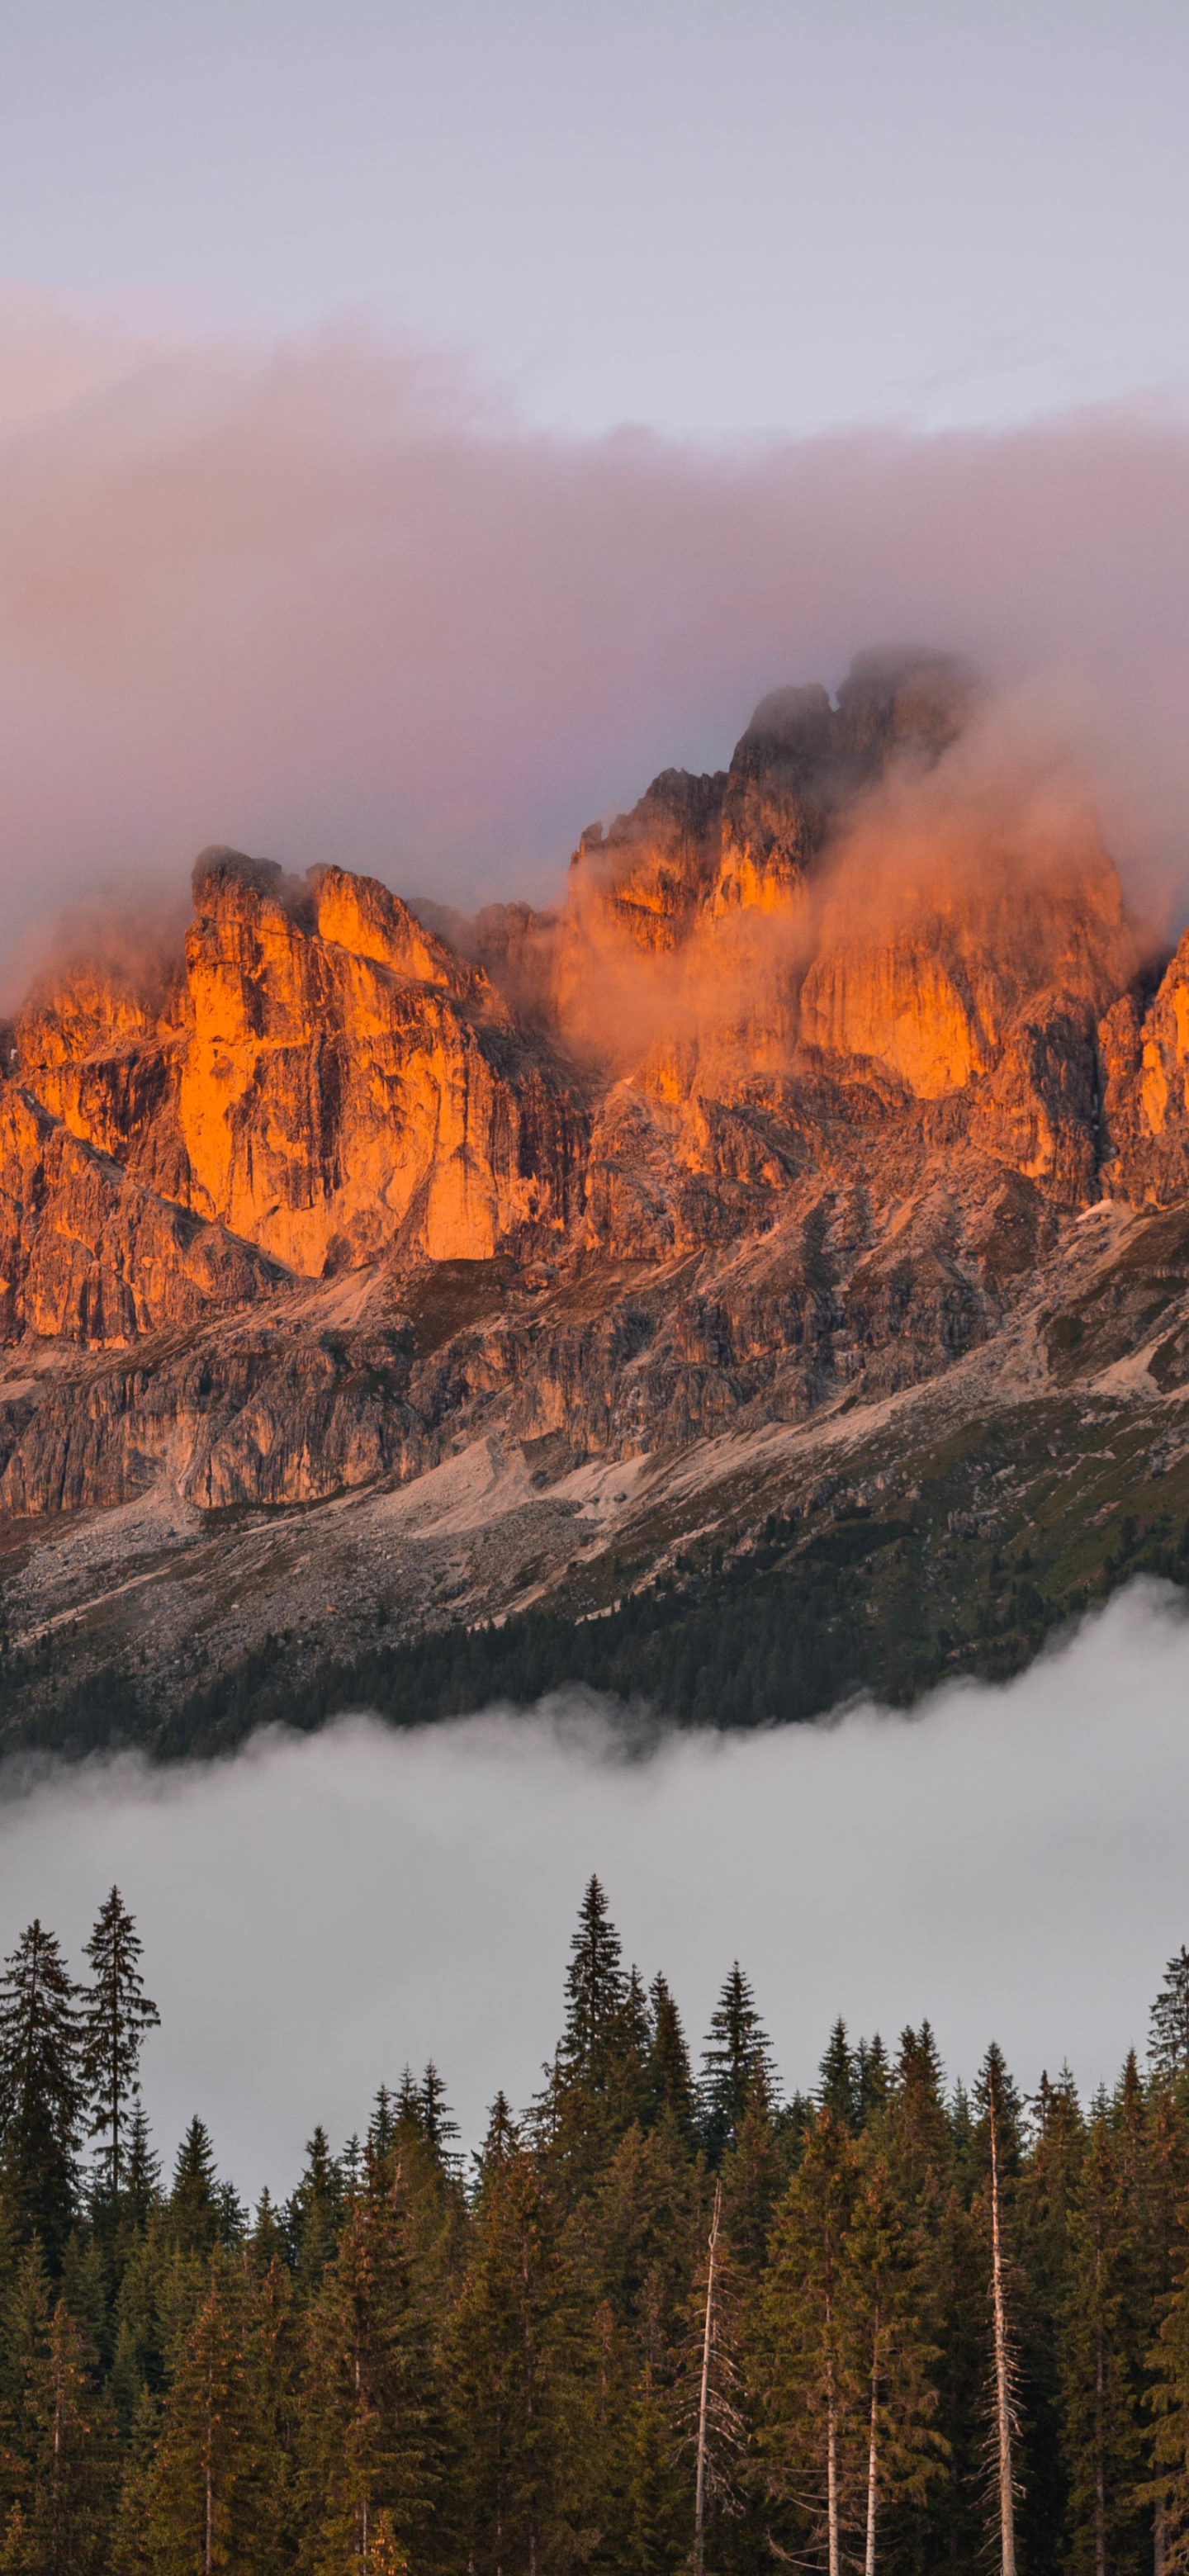 Sunset at the Dolomites Mountains by Lenny welvaert